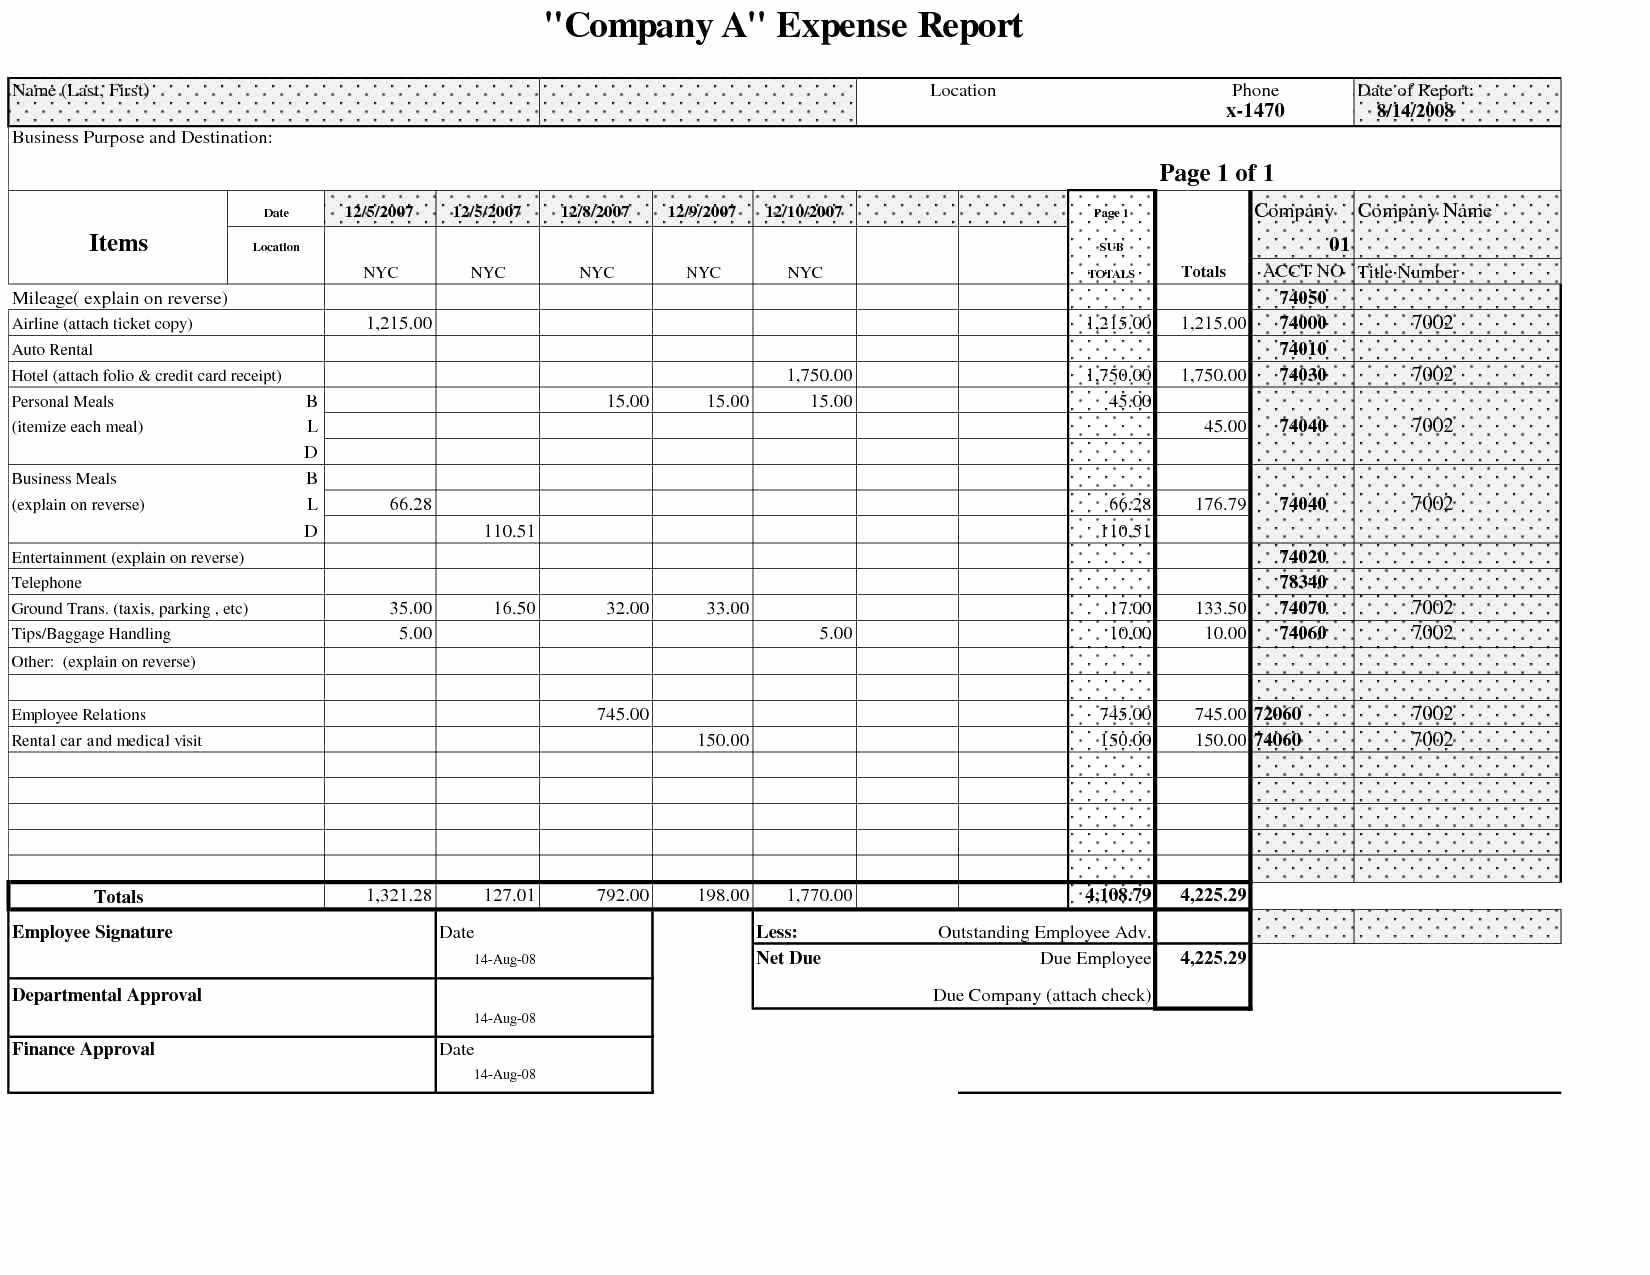 Business Expenses Spreadsheet Template Uk in Business Expenses Spreadsheet Elegant Business Expense Sheet In